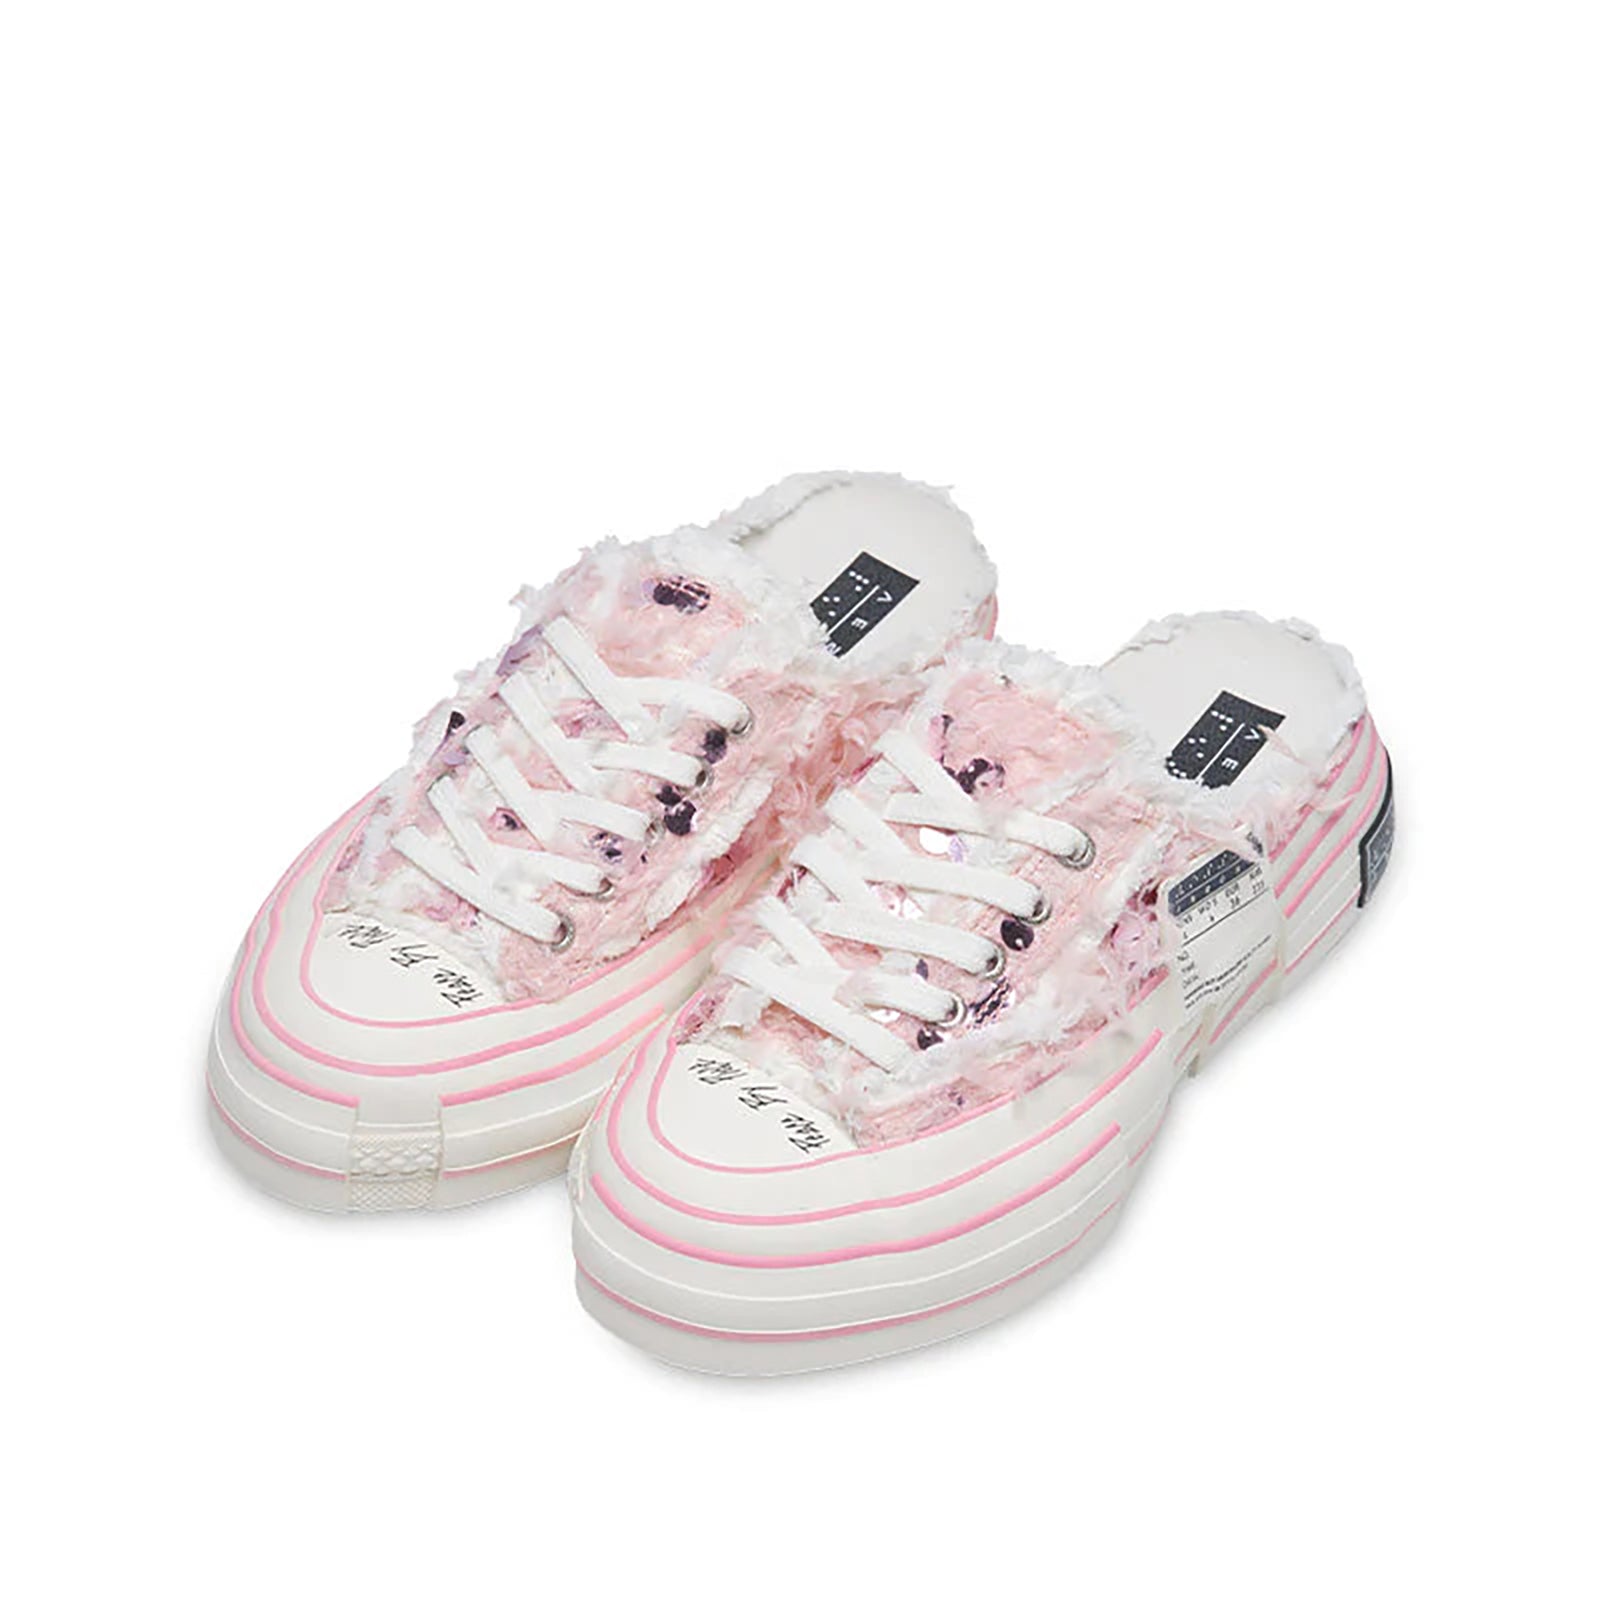 xVESSEL Slip On Pink Passion